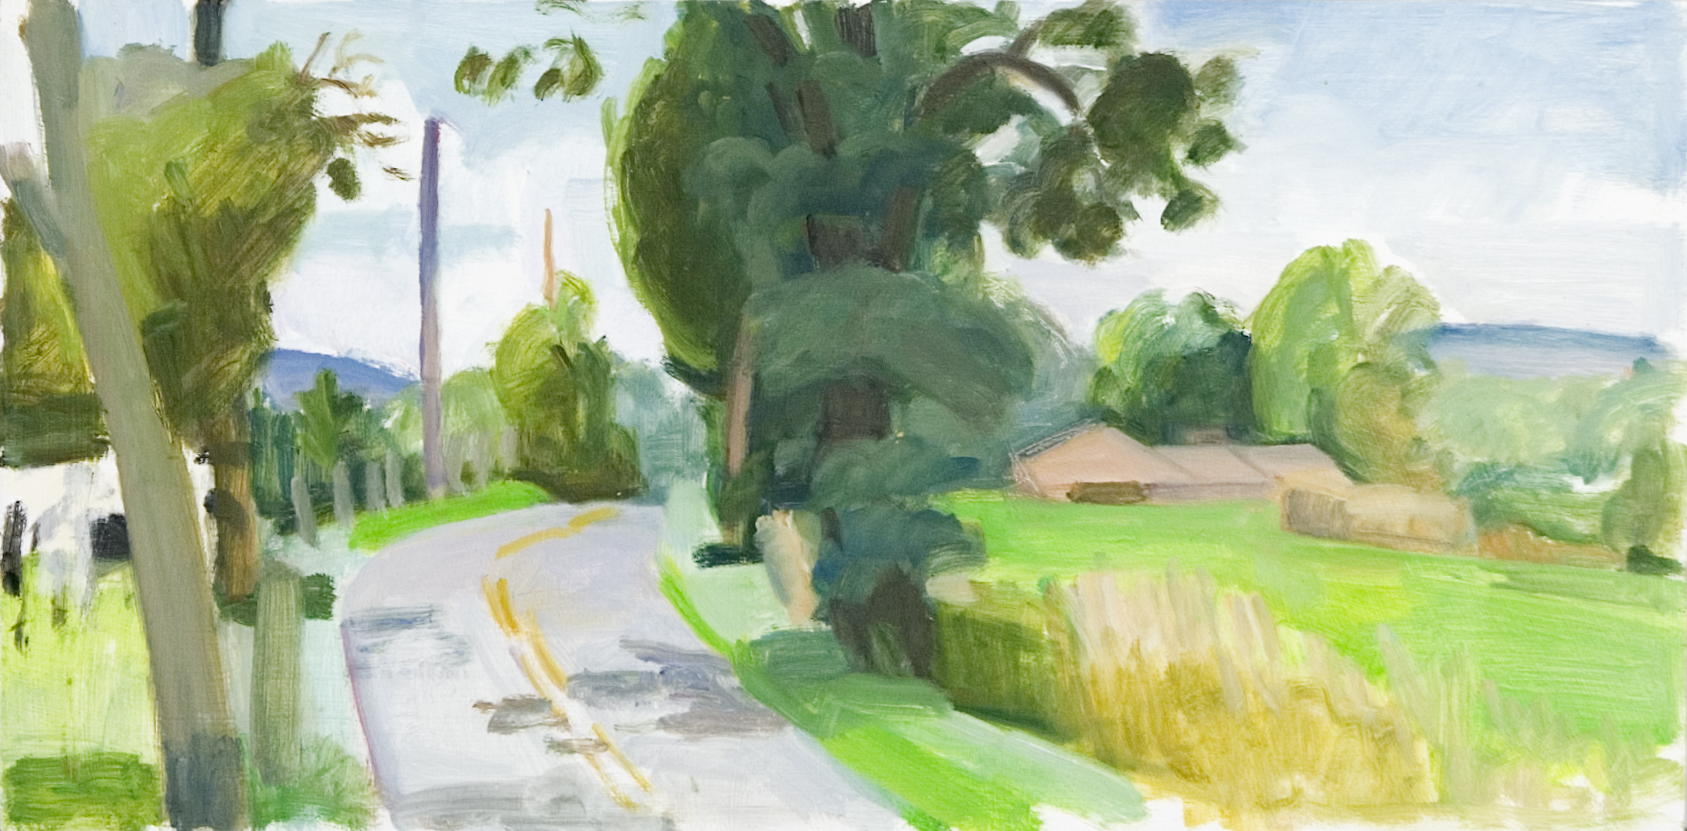   Maple Lane, Allamuchy , 2008, oil on panel, 9"x18" (Private collection) 